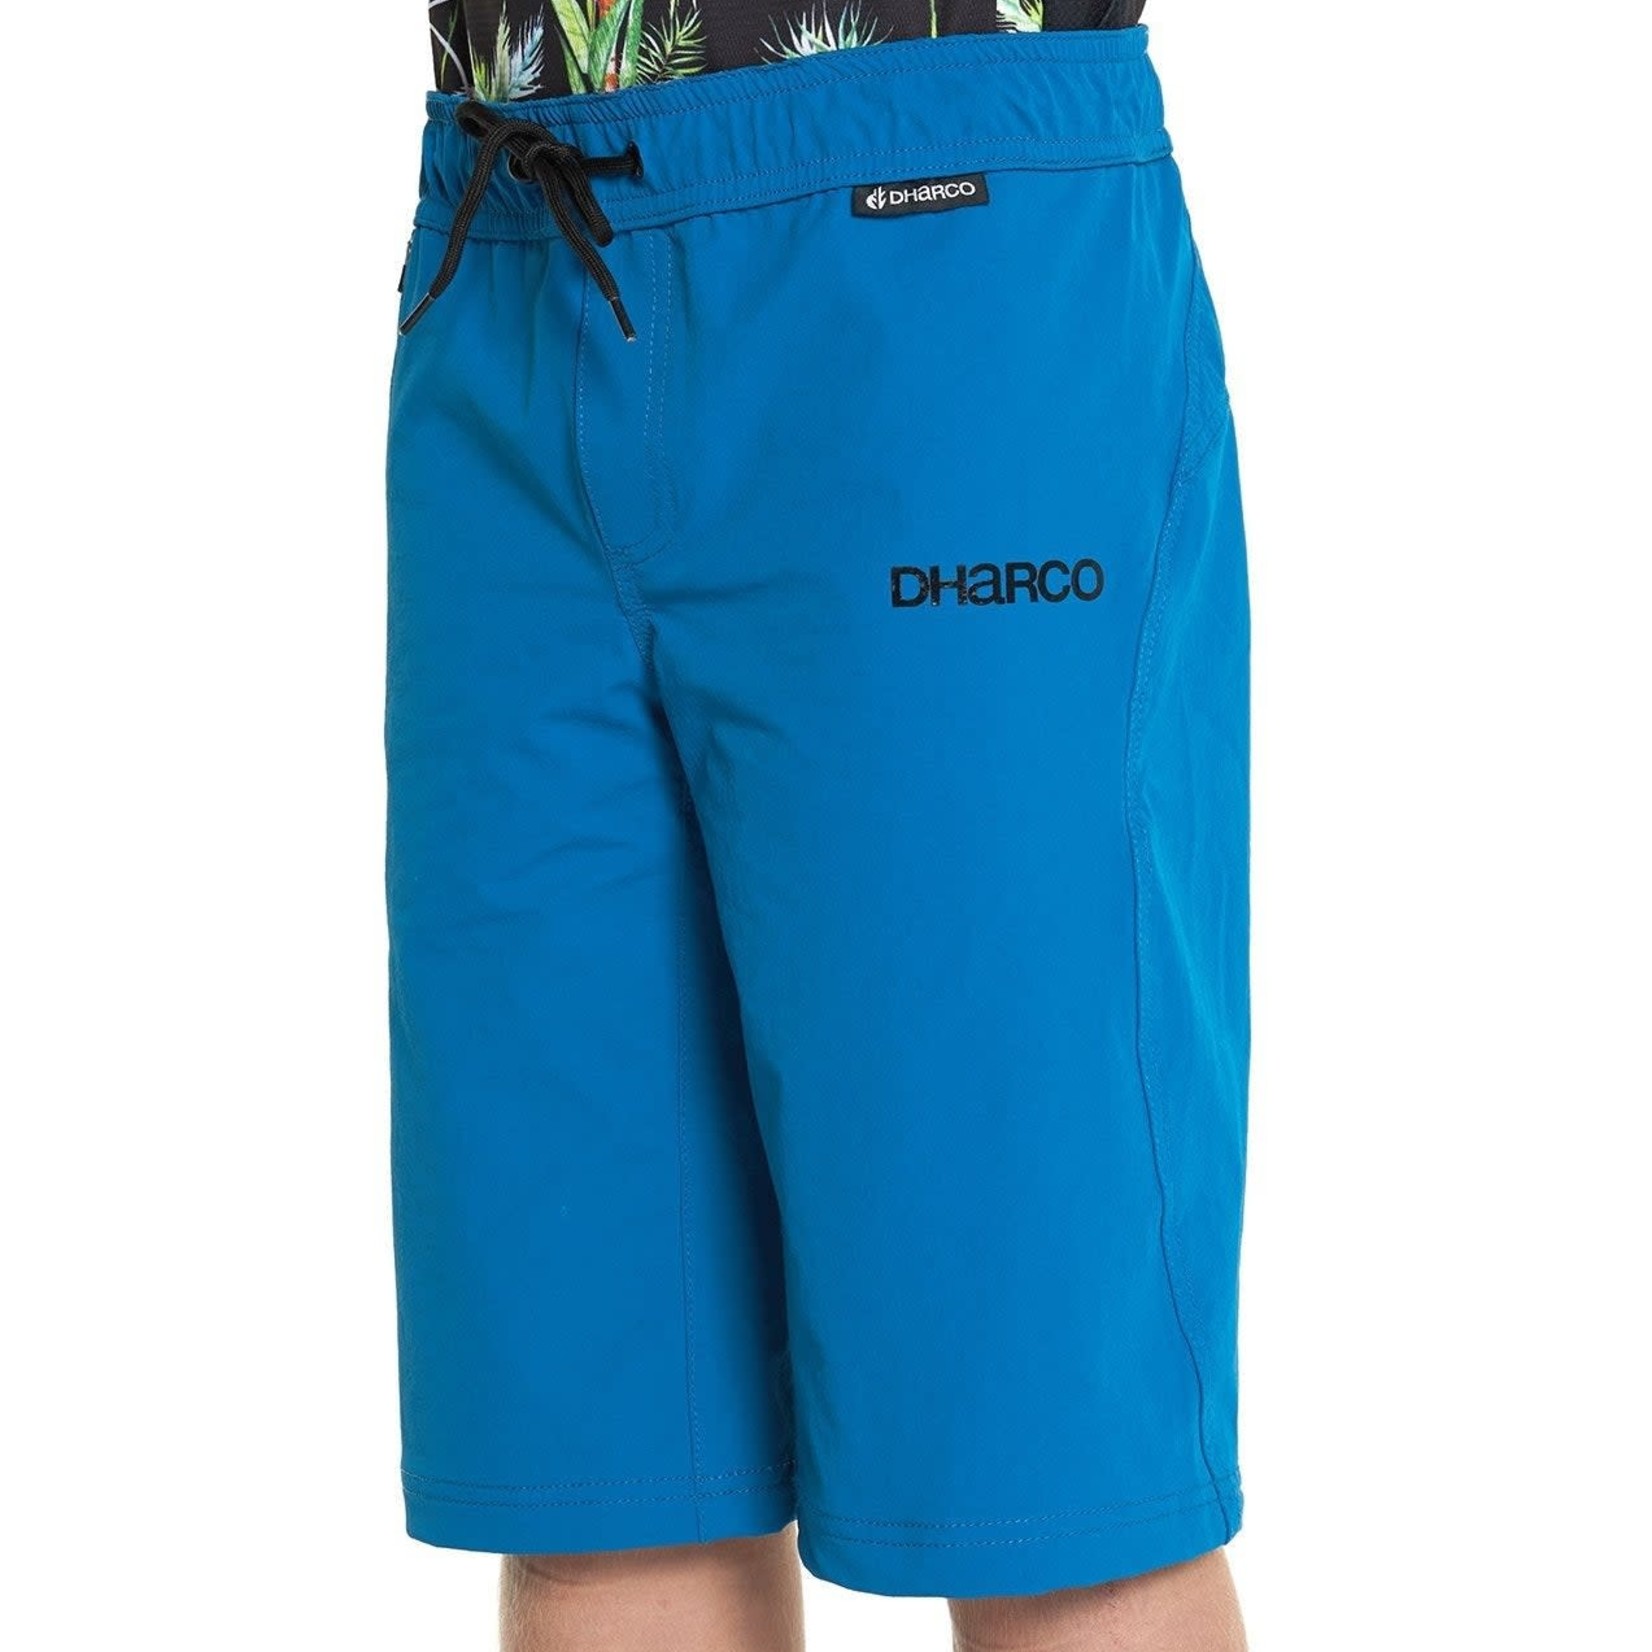 DHaRCO DHaRCO Youth Gravity Shorts Blue YXXL / 14